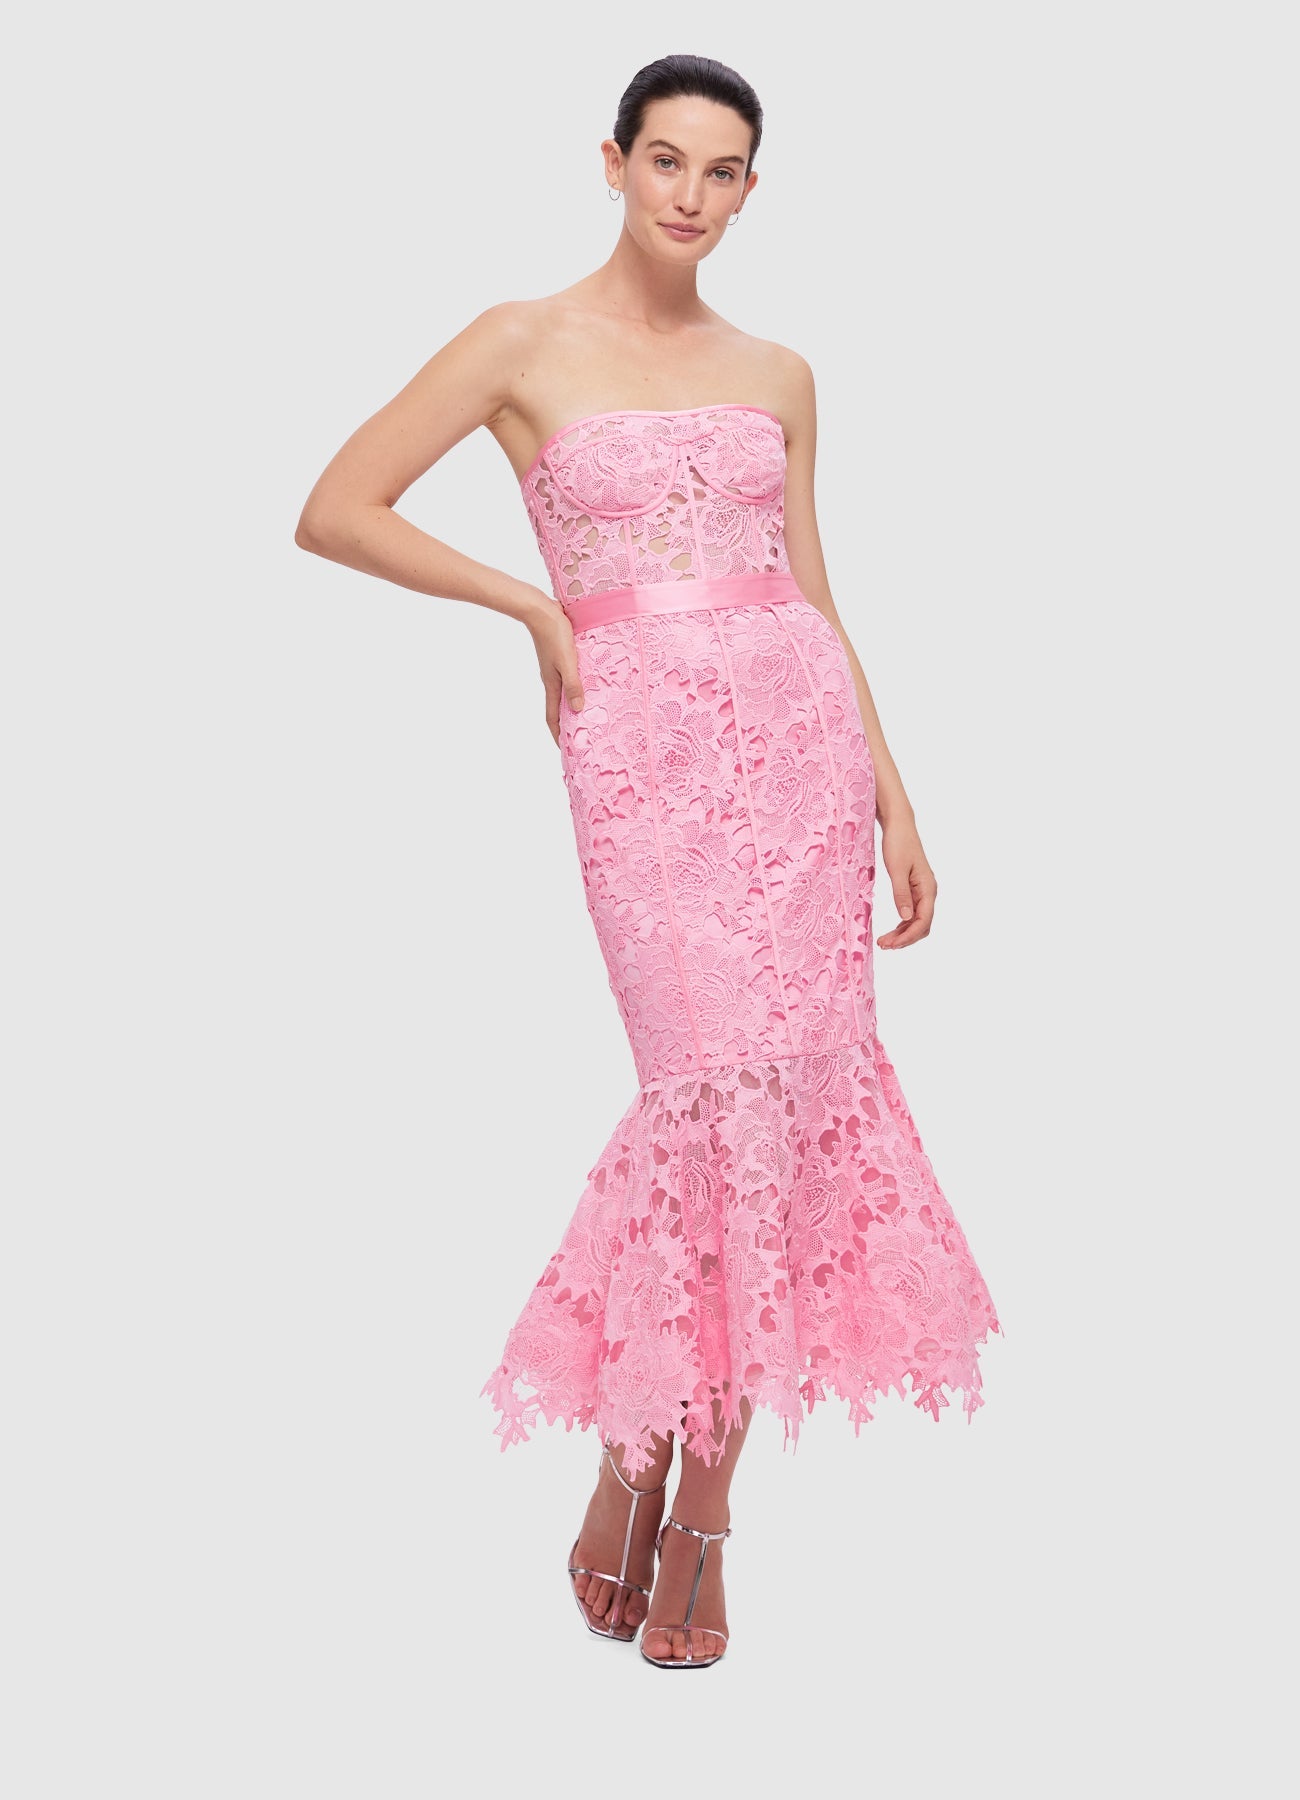 Clover Lace Bustier Ruffle Midi Dress - Candy Pink